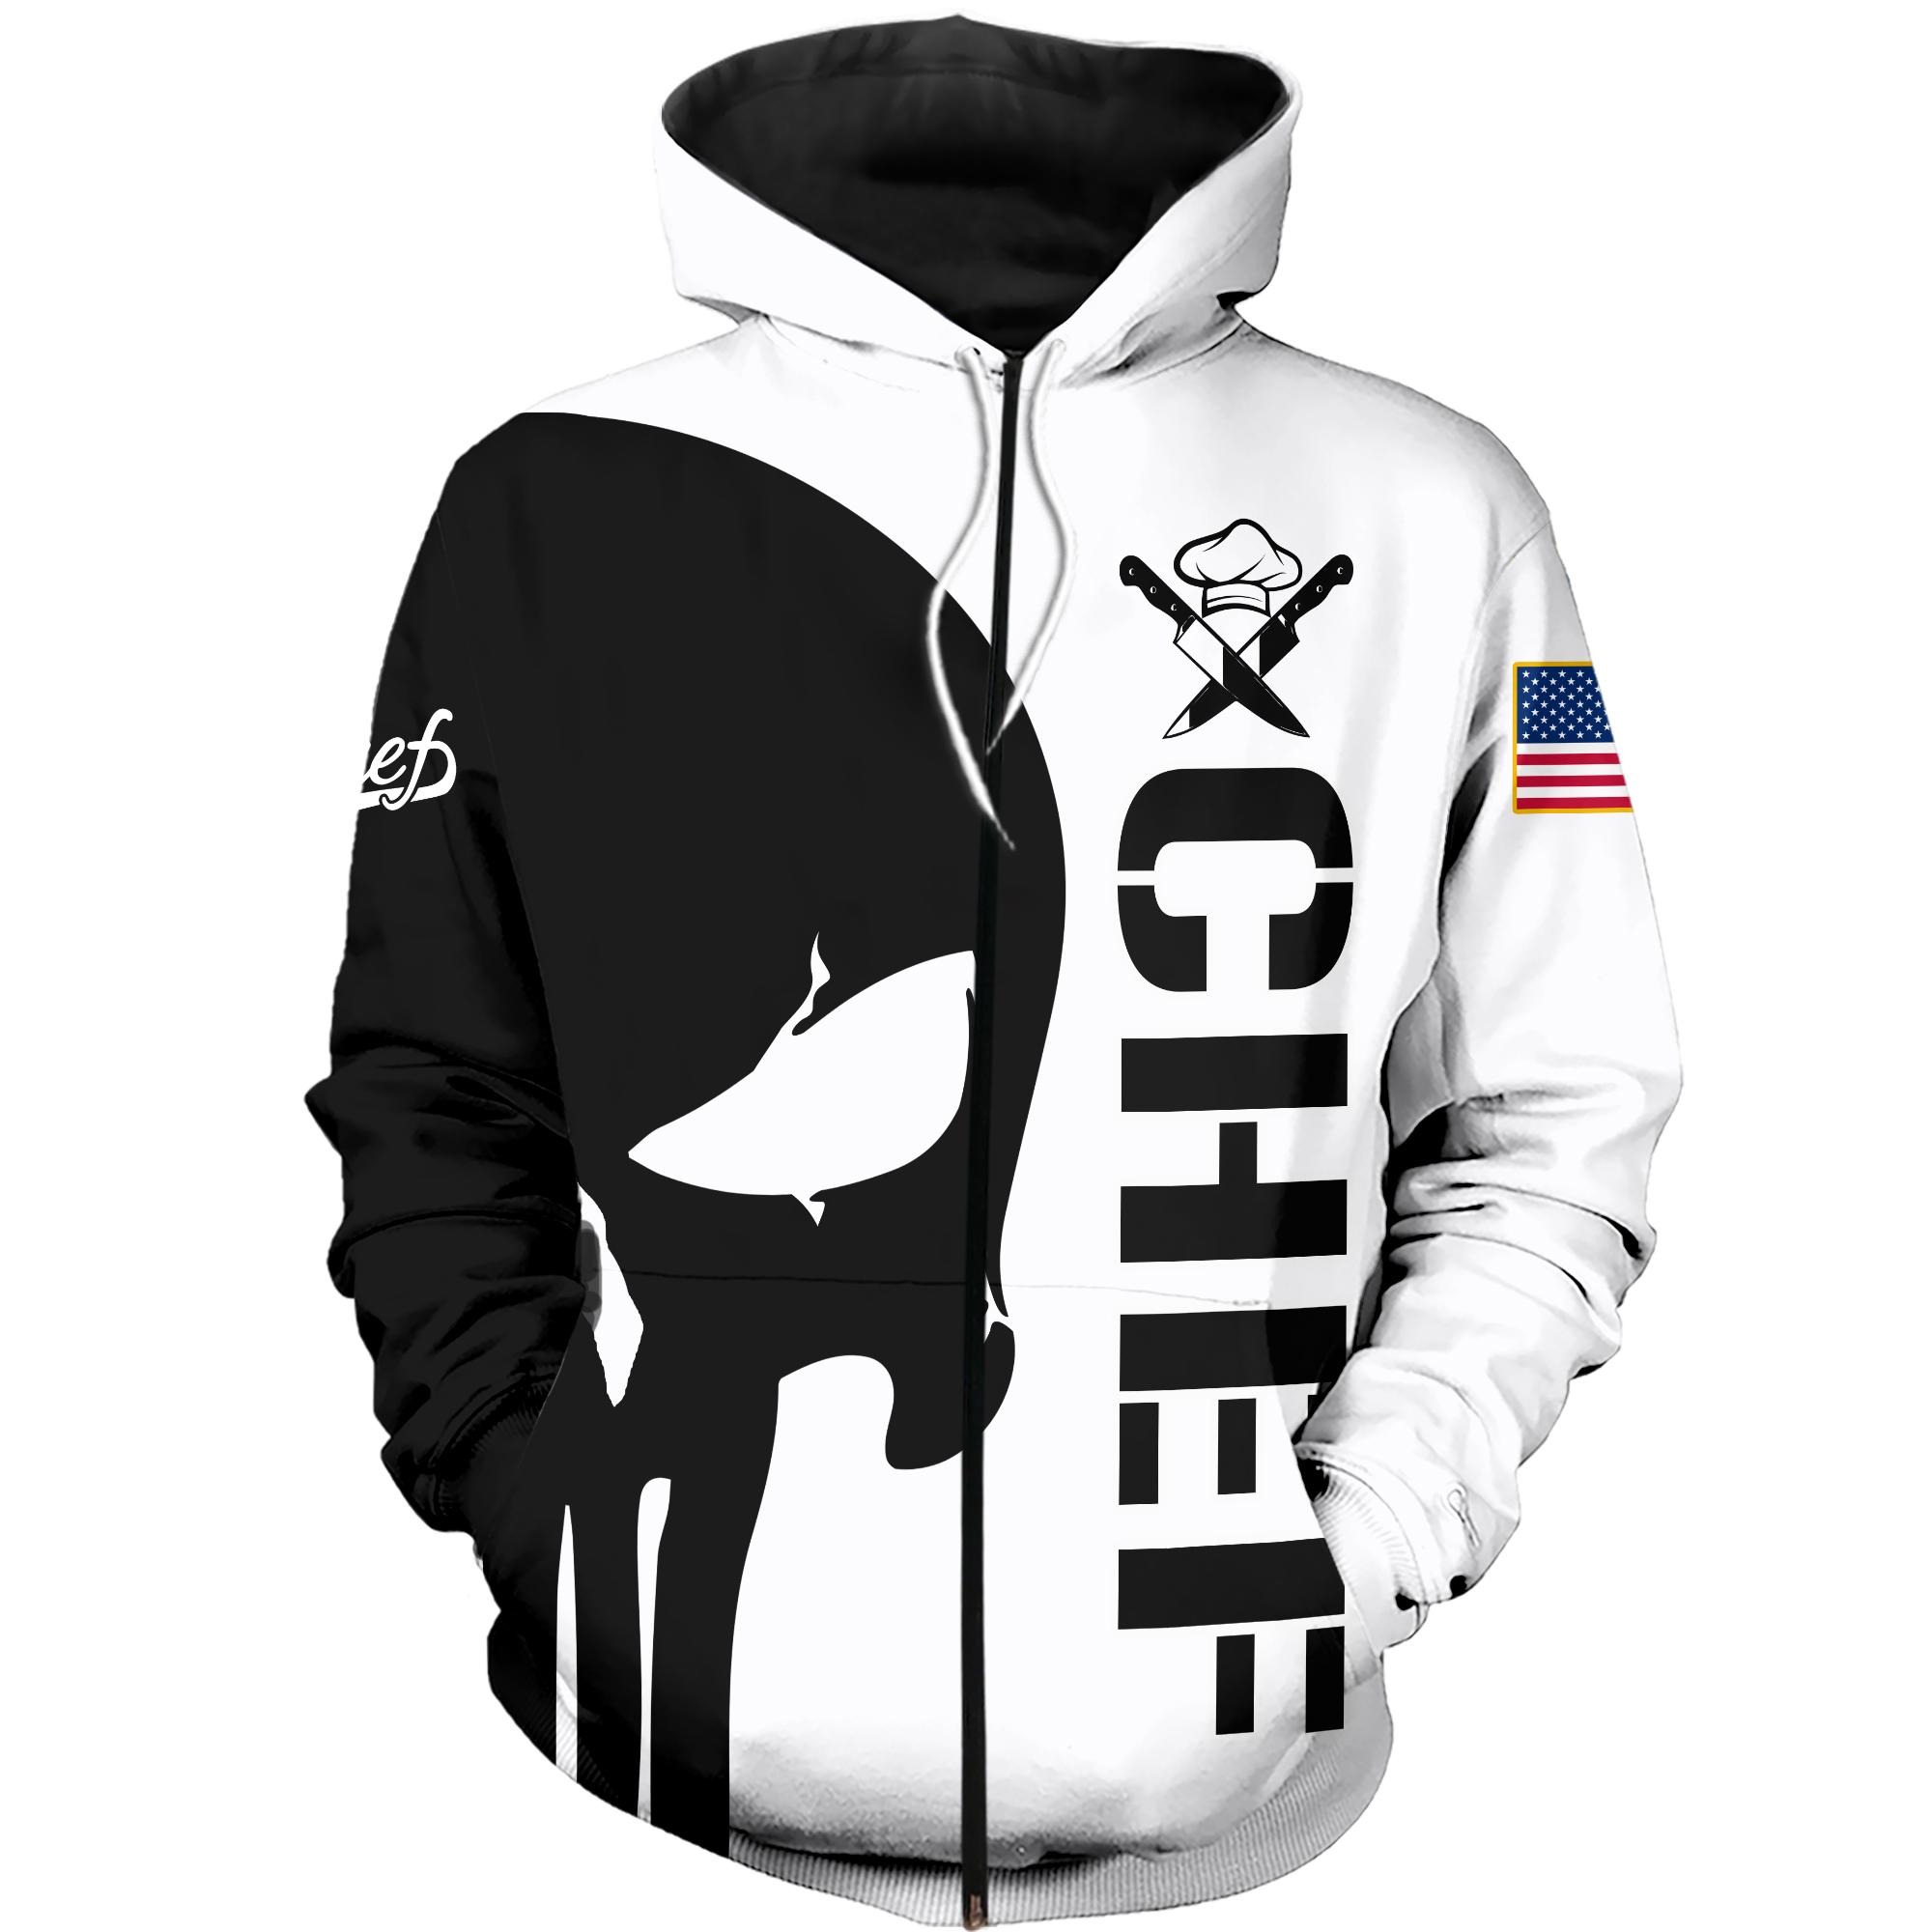 The punisher chef all over print zip hoodie